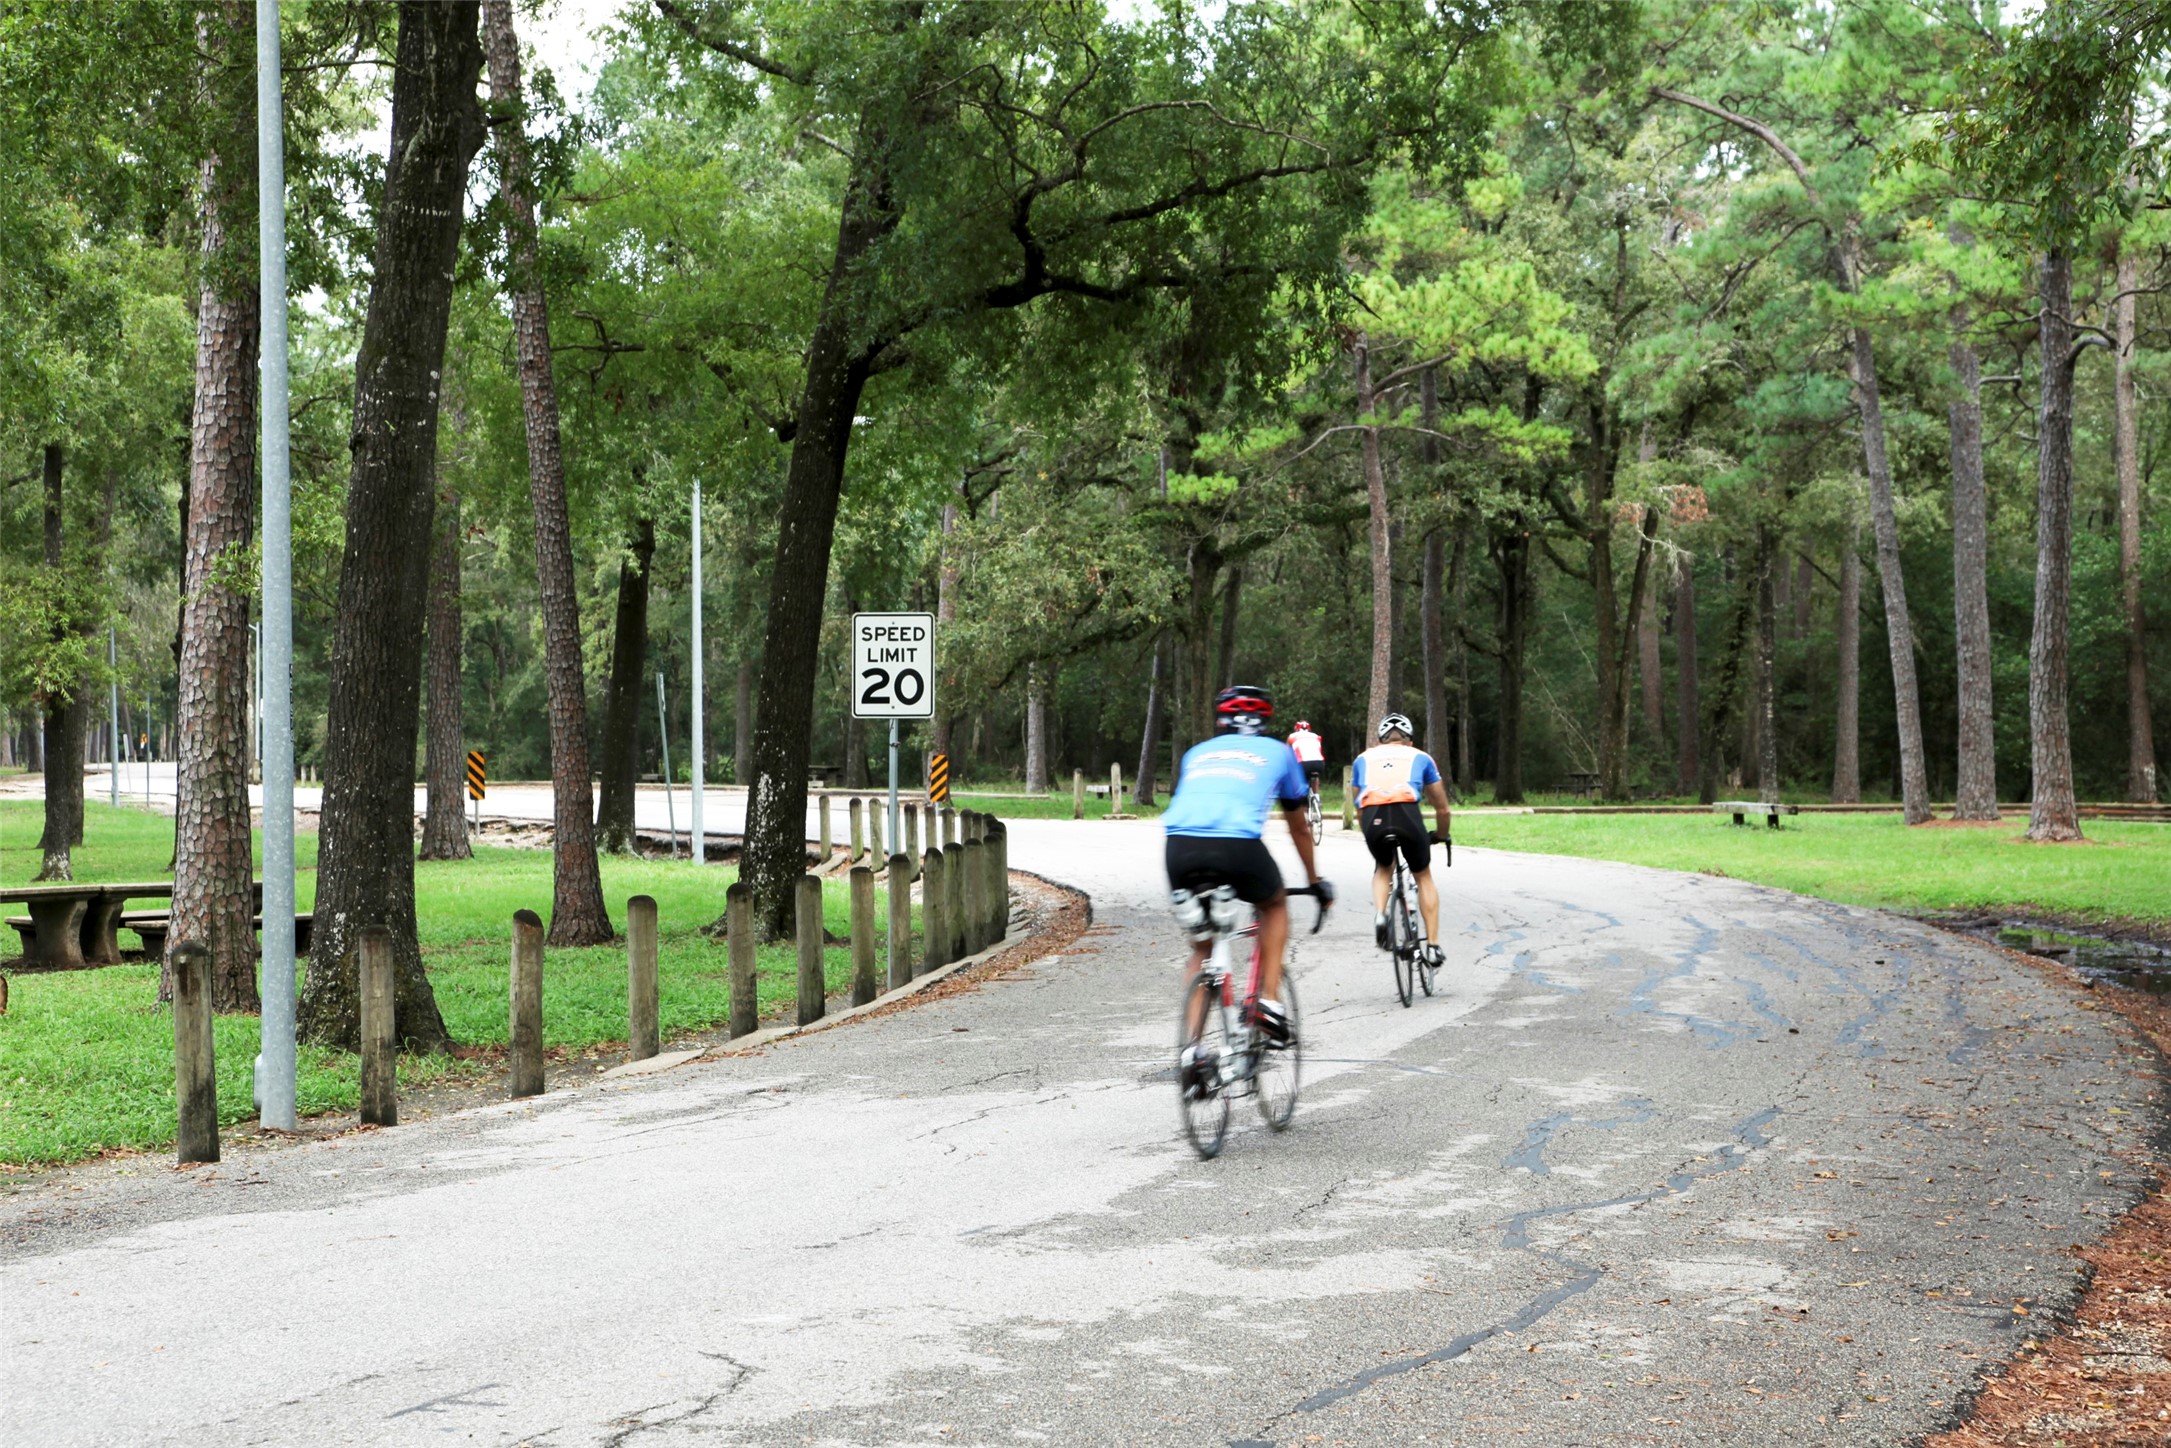 The park offers a variation of bike trails that range from easy to hard and a popular three-mile running course.